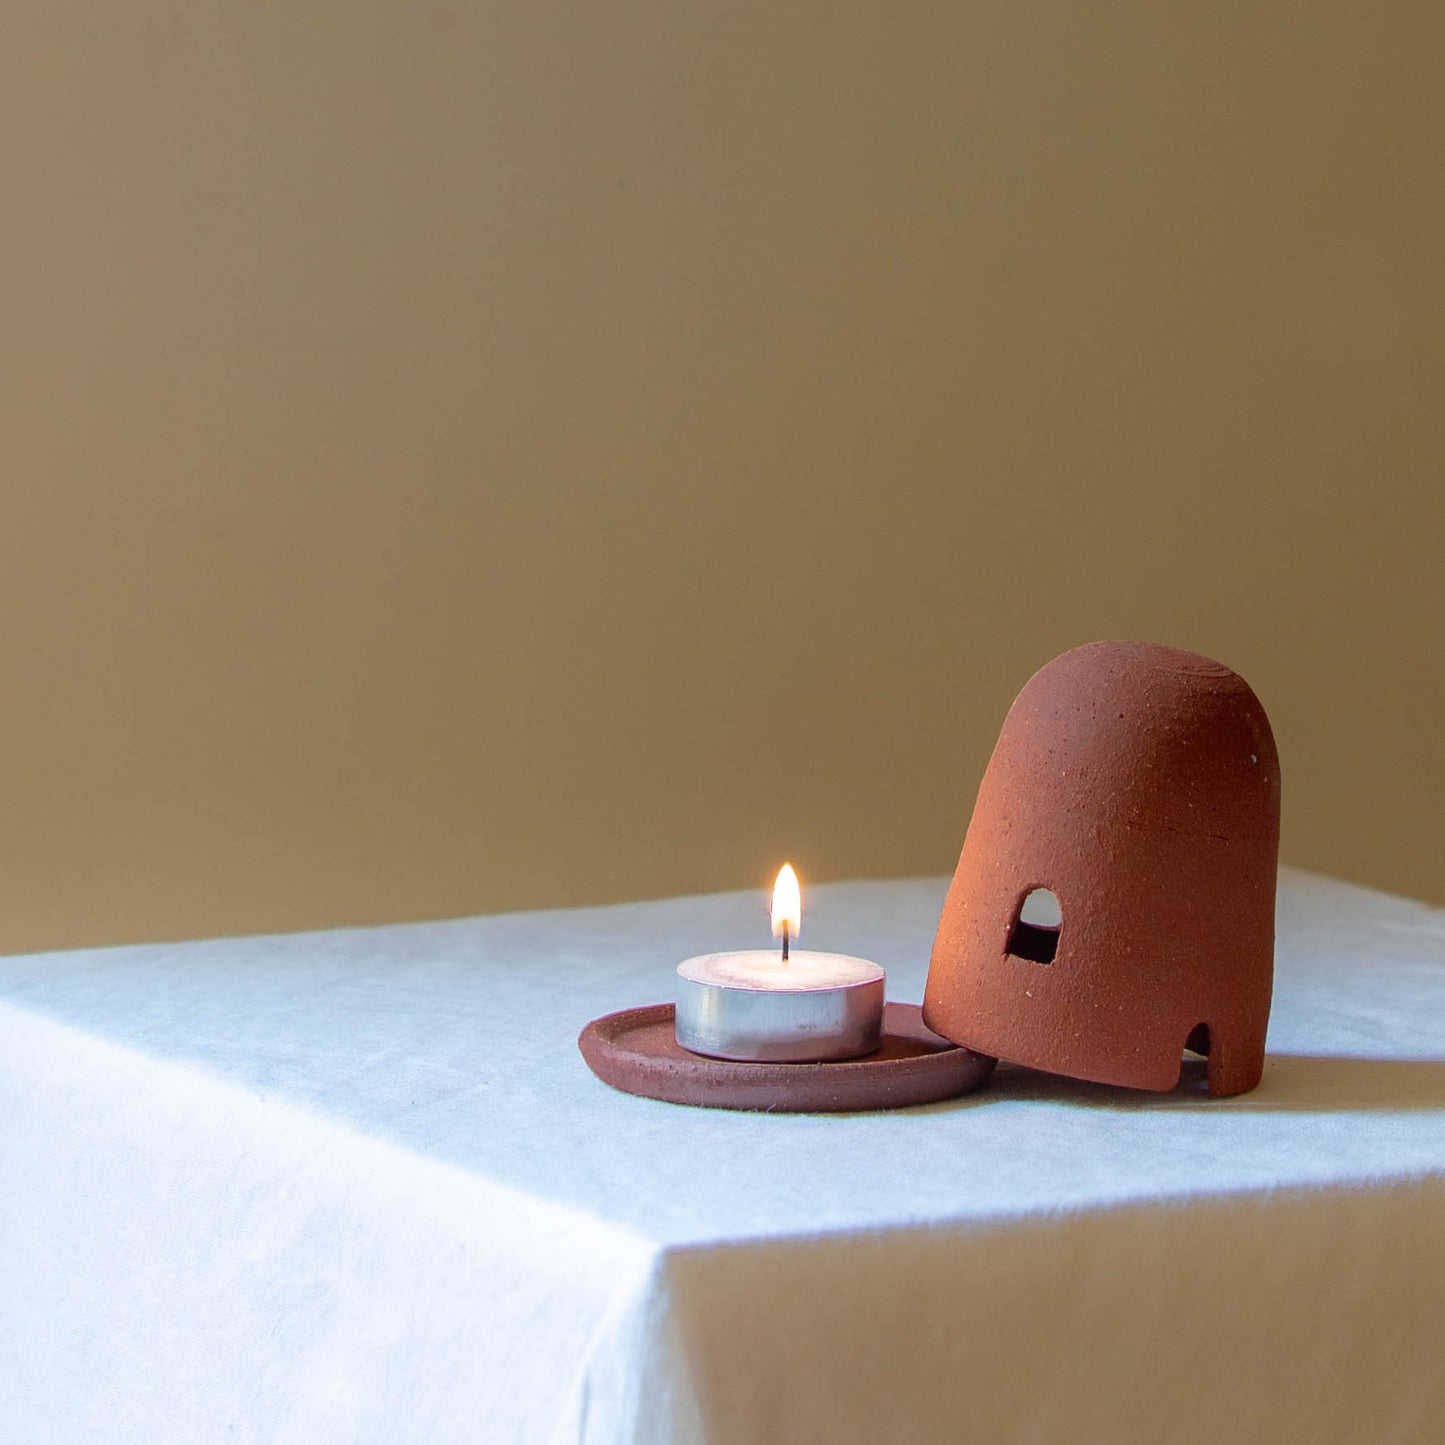 A Dome Burner in terracotta sitting on a white plinth with a lit incense cone which is billowing smoke. The dome burner has a smooth dome top with hand carved windows and sits on a dish.